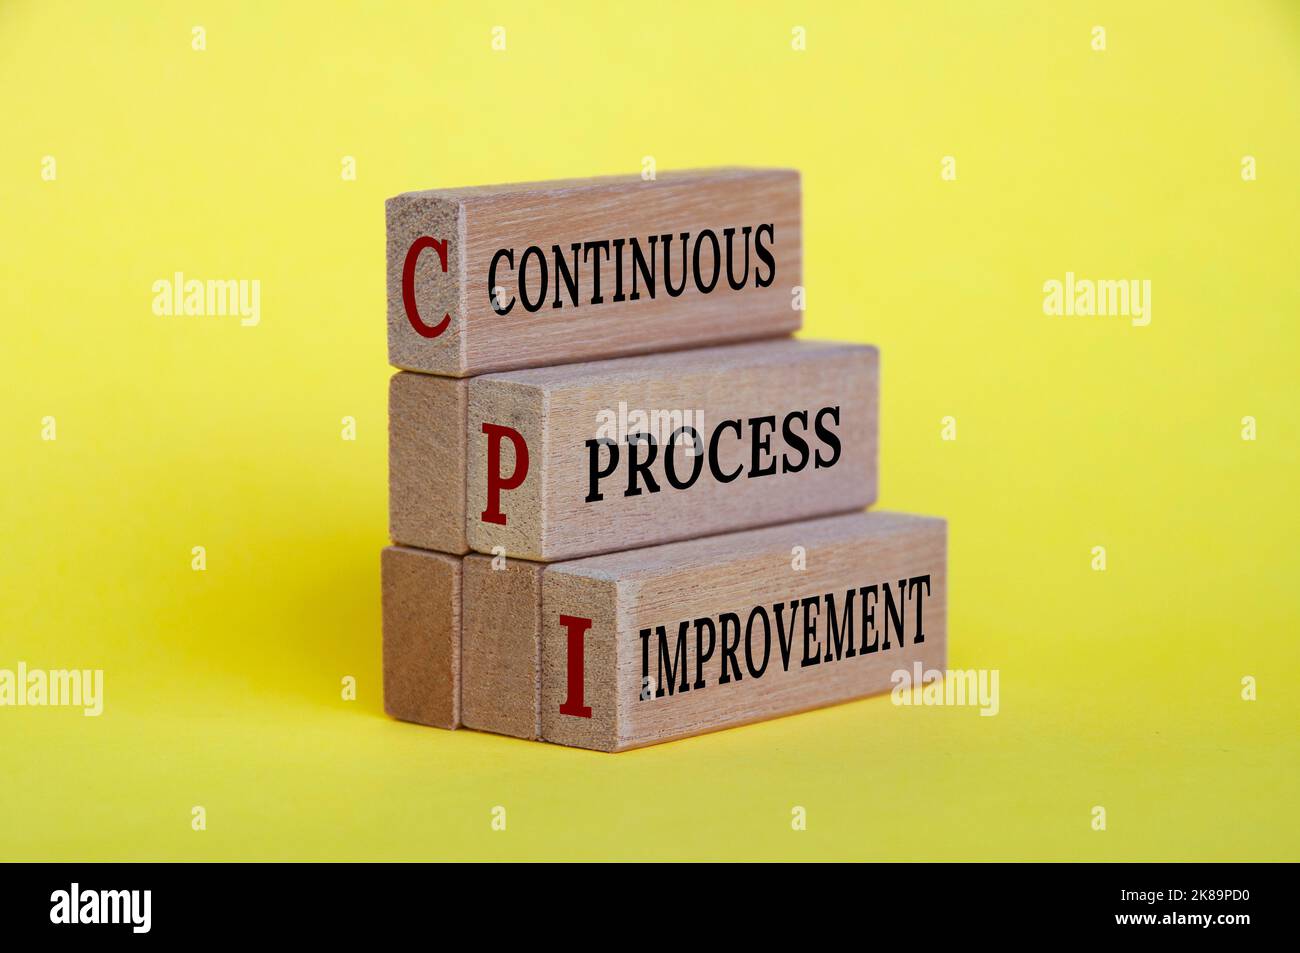 Continuous process improvement text on wooden blocks with yellow background. Business improvement and process standardization concept. Stock Photo